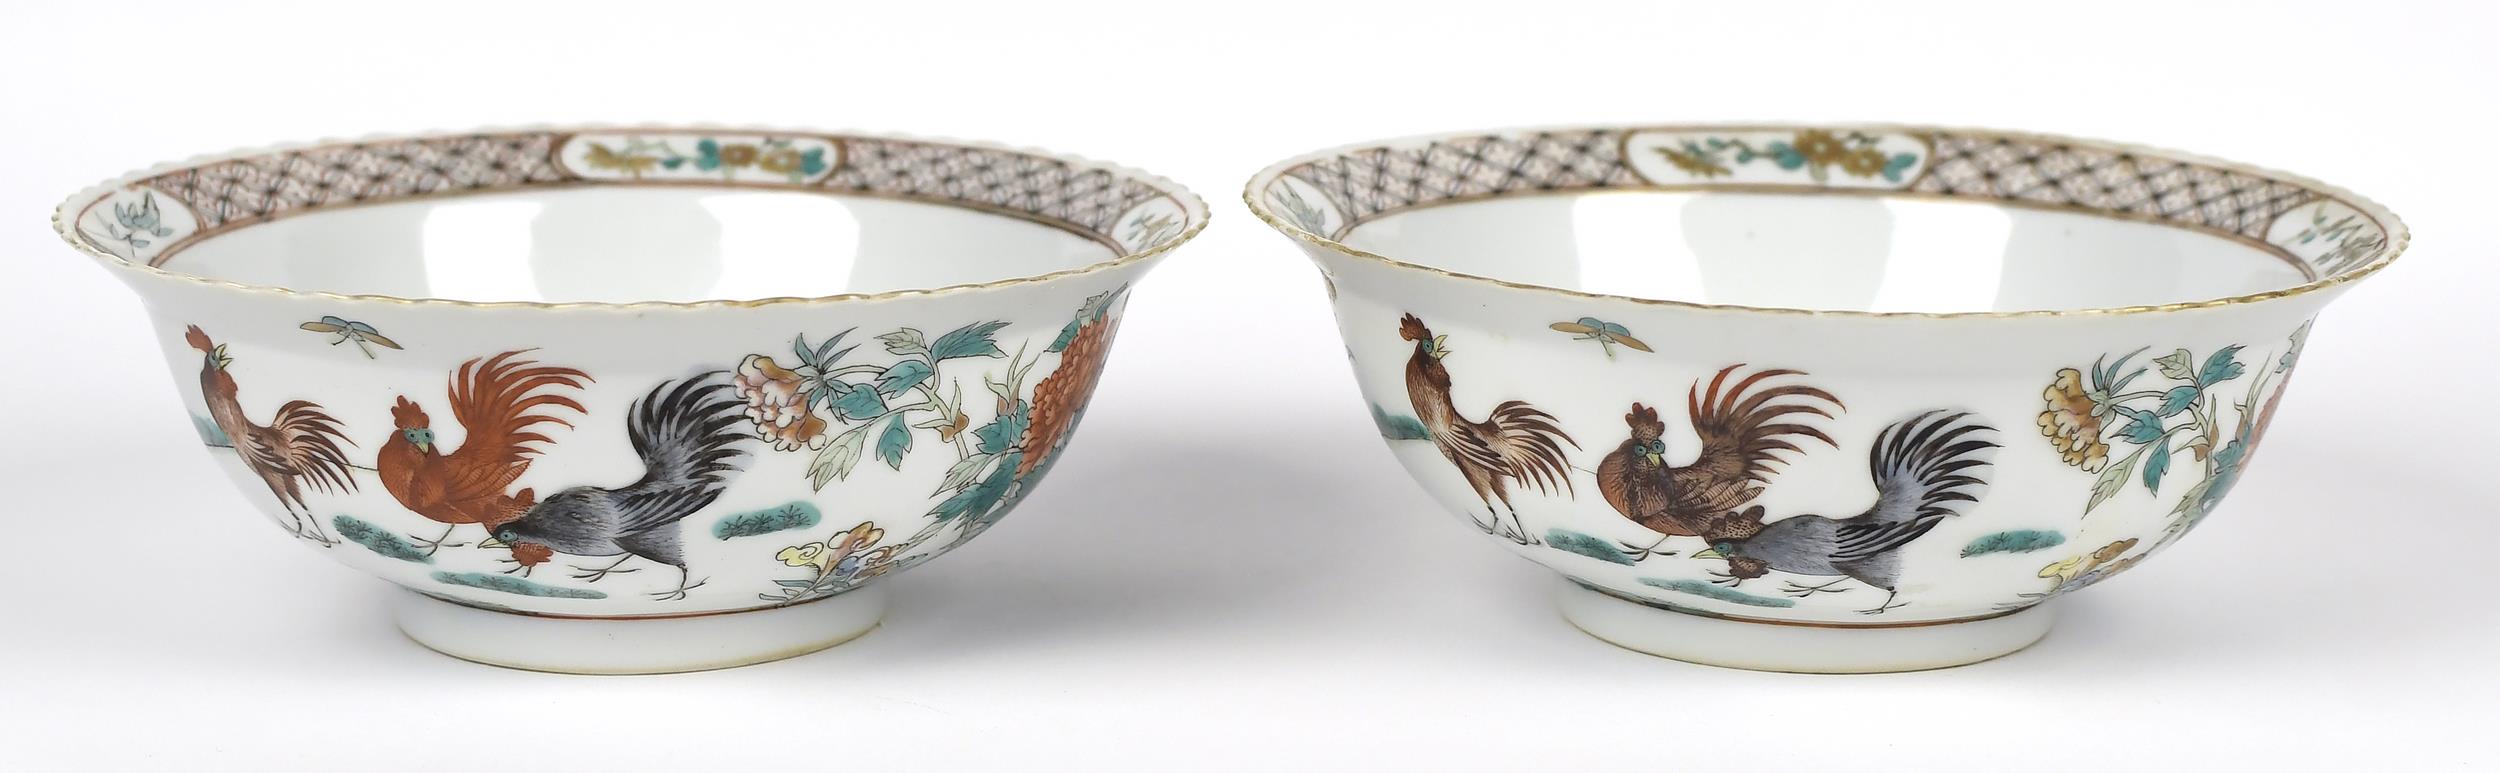 PAIR OF CHINESE 19TH C. PORCELAIN